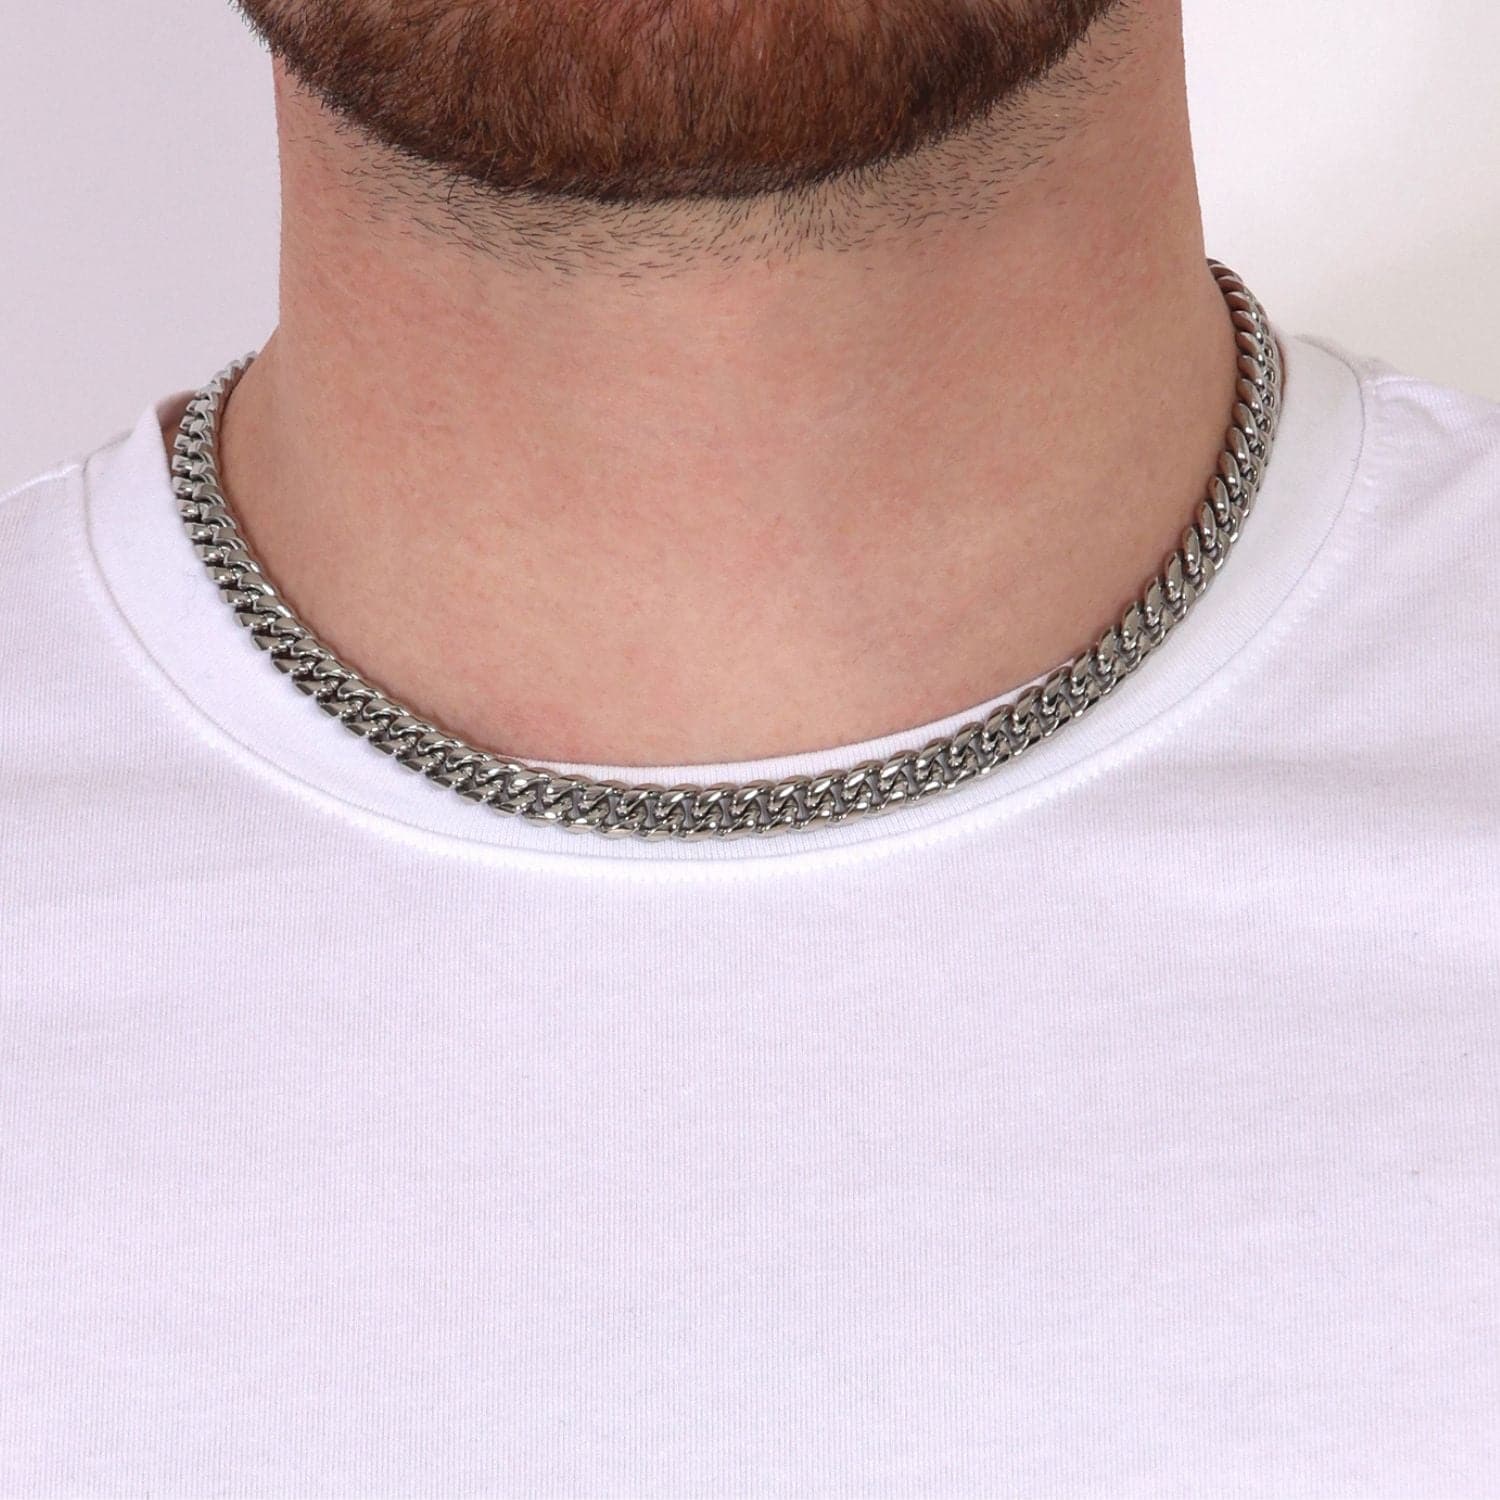 CUBAN CHAIN. - (Stainless Steel) 8MM